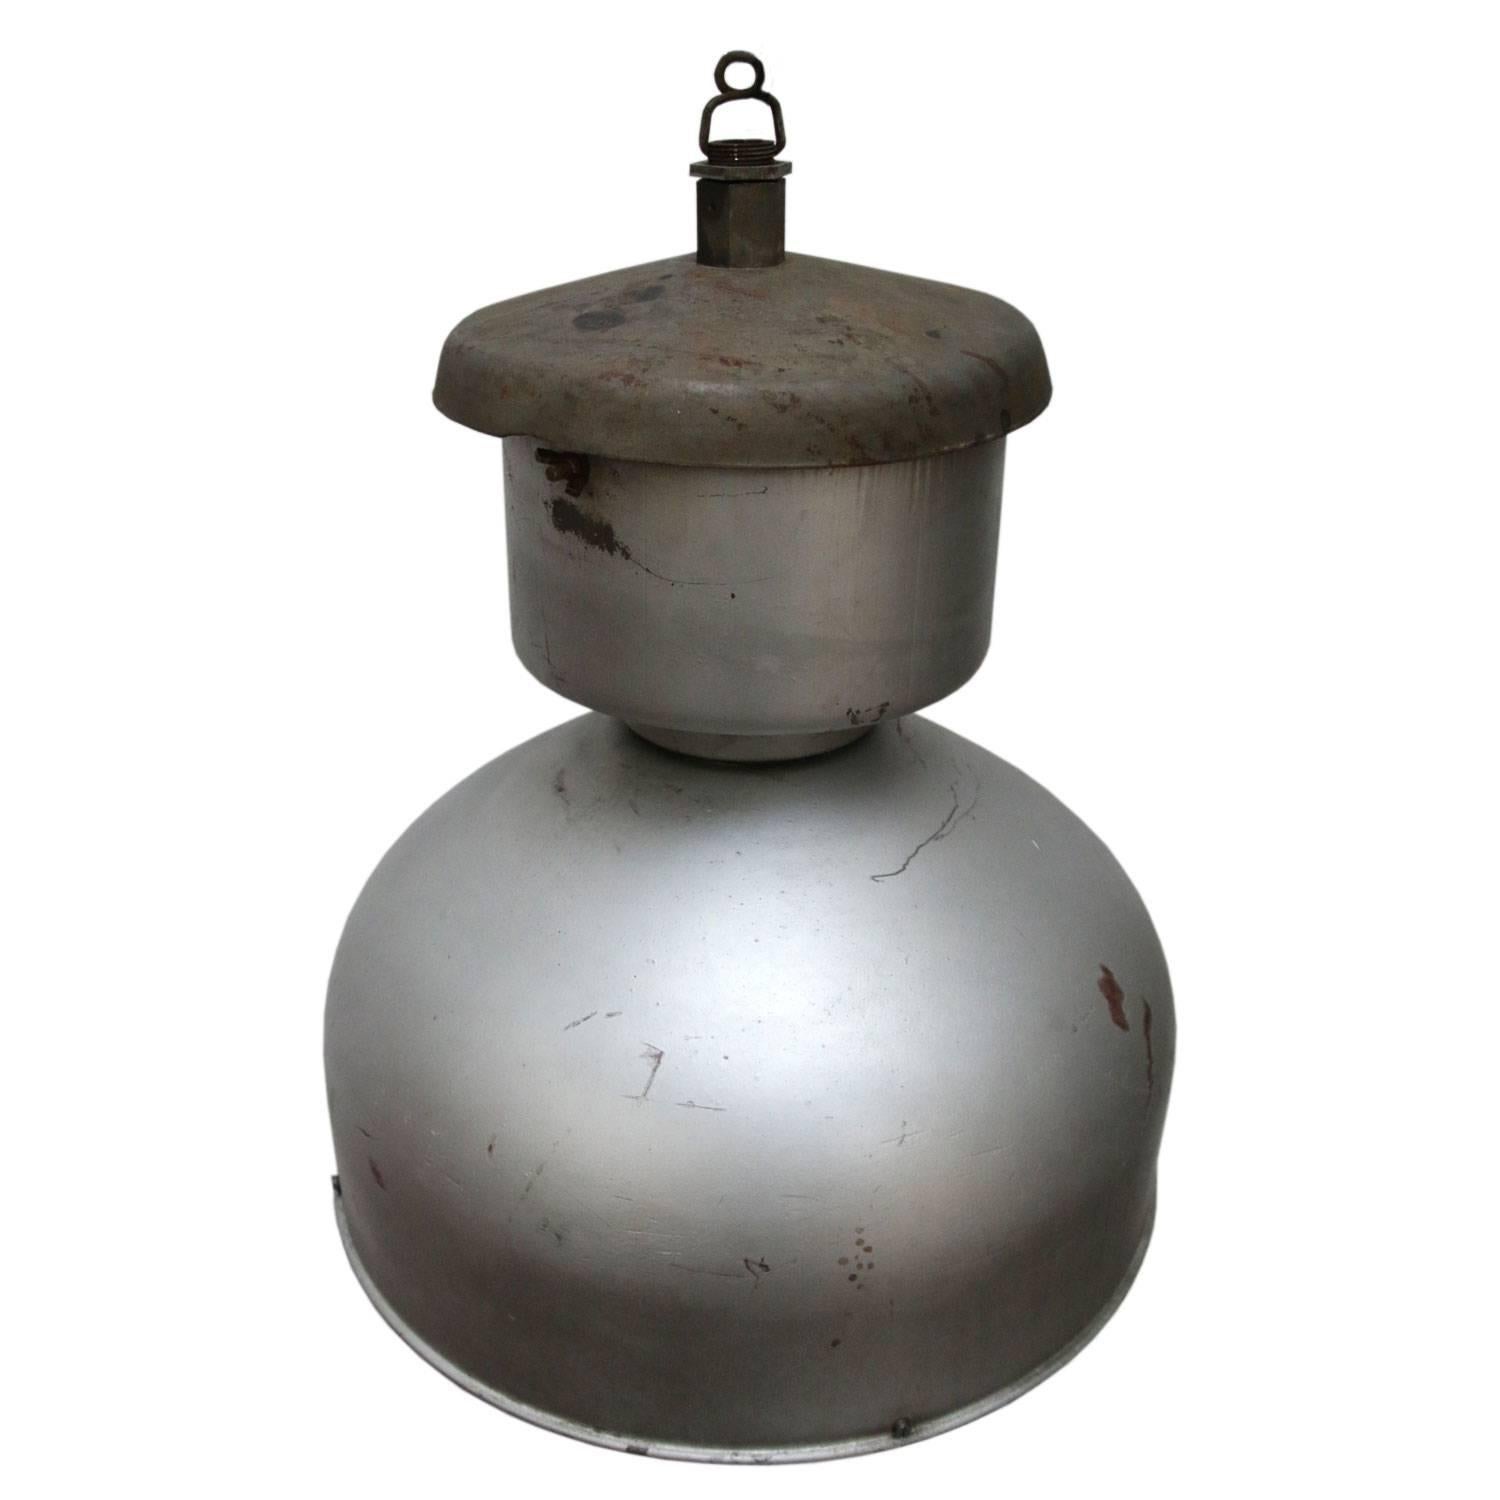 Industrial hanging lamp. Grey metal.

Weight: 11.0 kg / 24.3 lb

Priced per individual item. All lamps have been made suitable by international standards for incandescent light bulbs, energy-efficient and LED bulbs. E26/E27 bulb holders and new